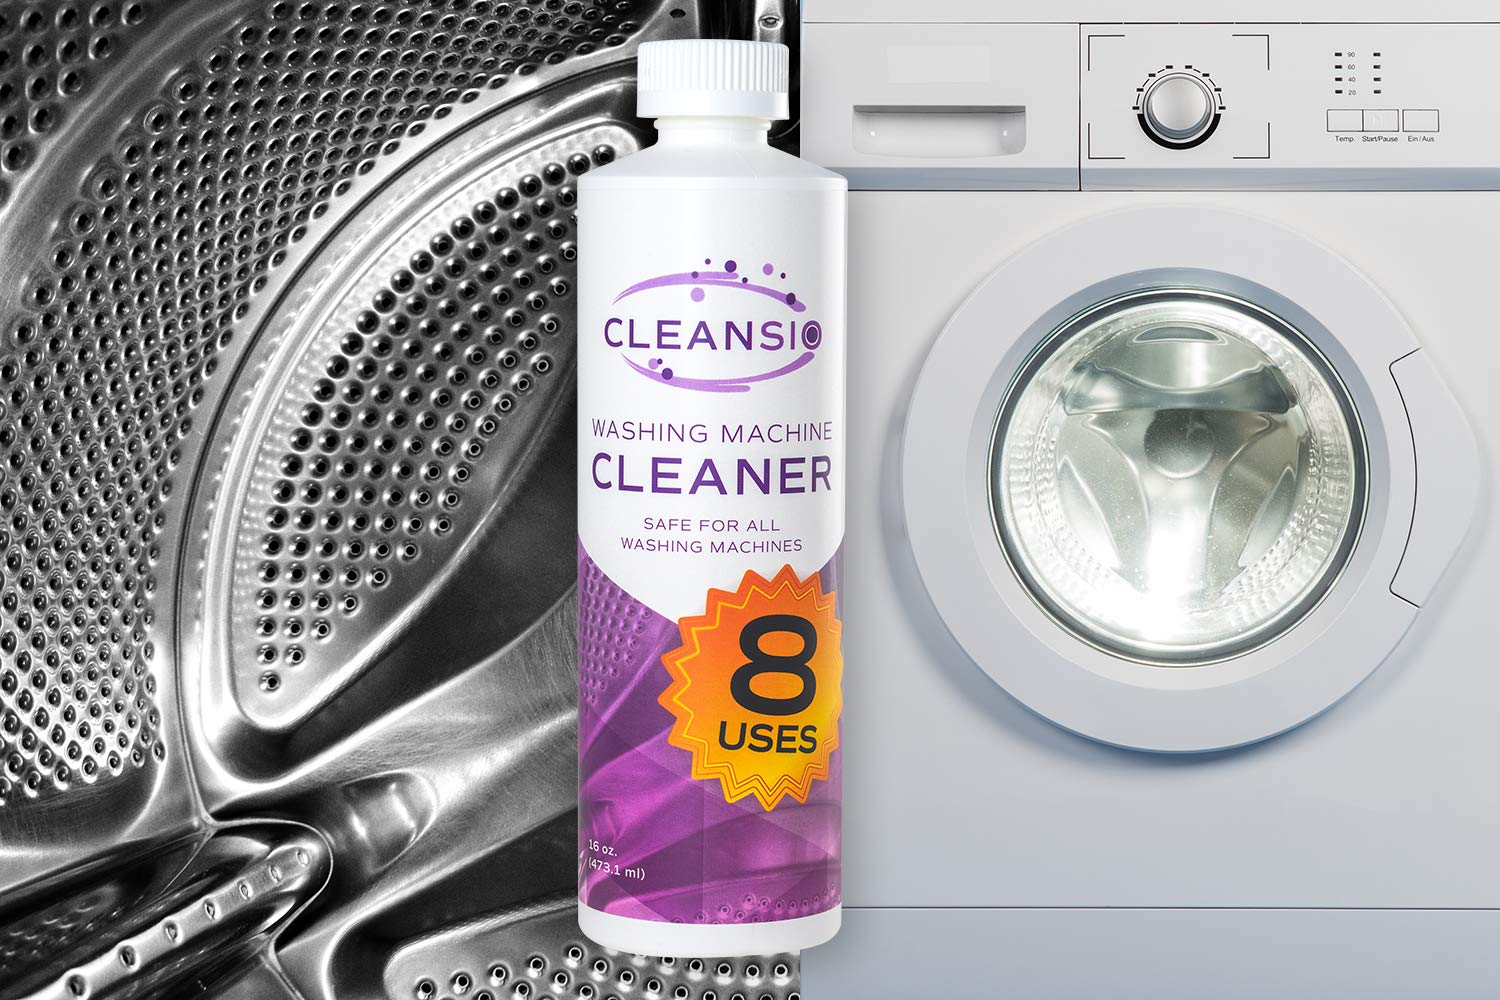 Cleansio Washing Machine Cleaner – Residue Destroyer and Odor Eliminat